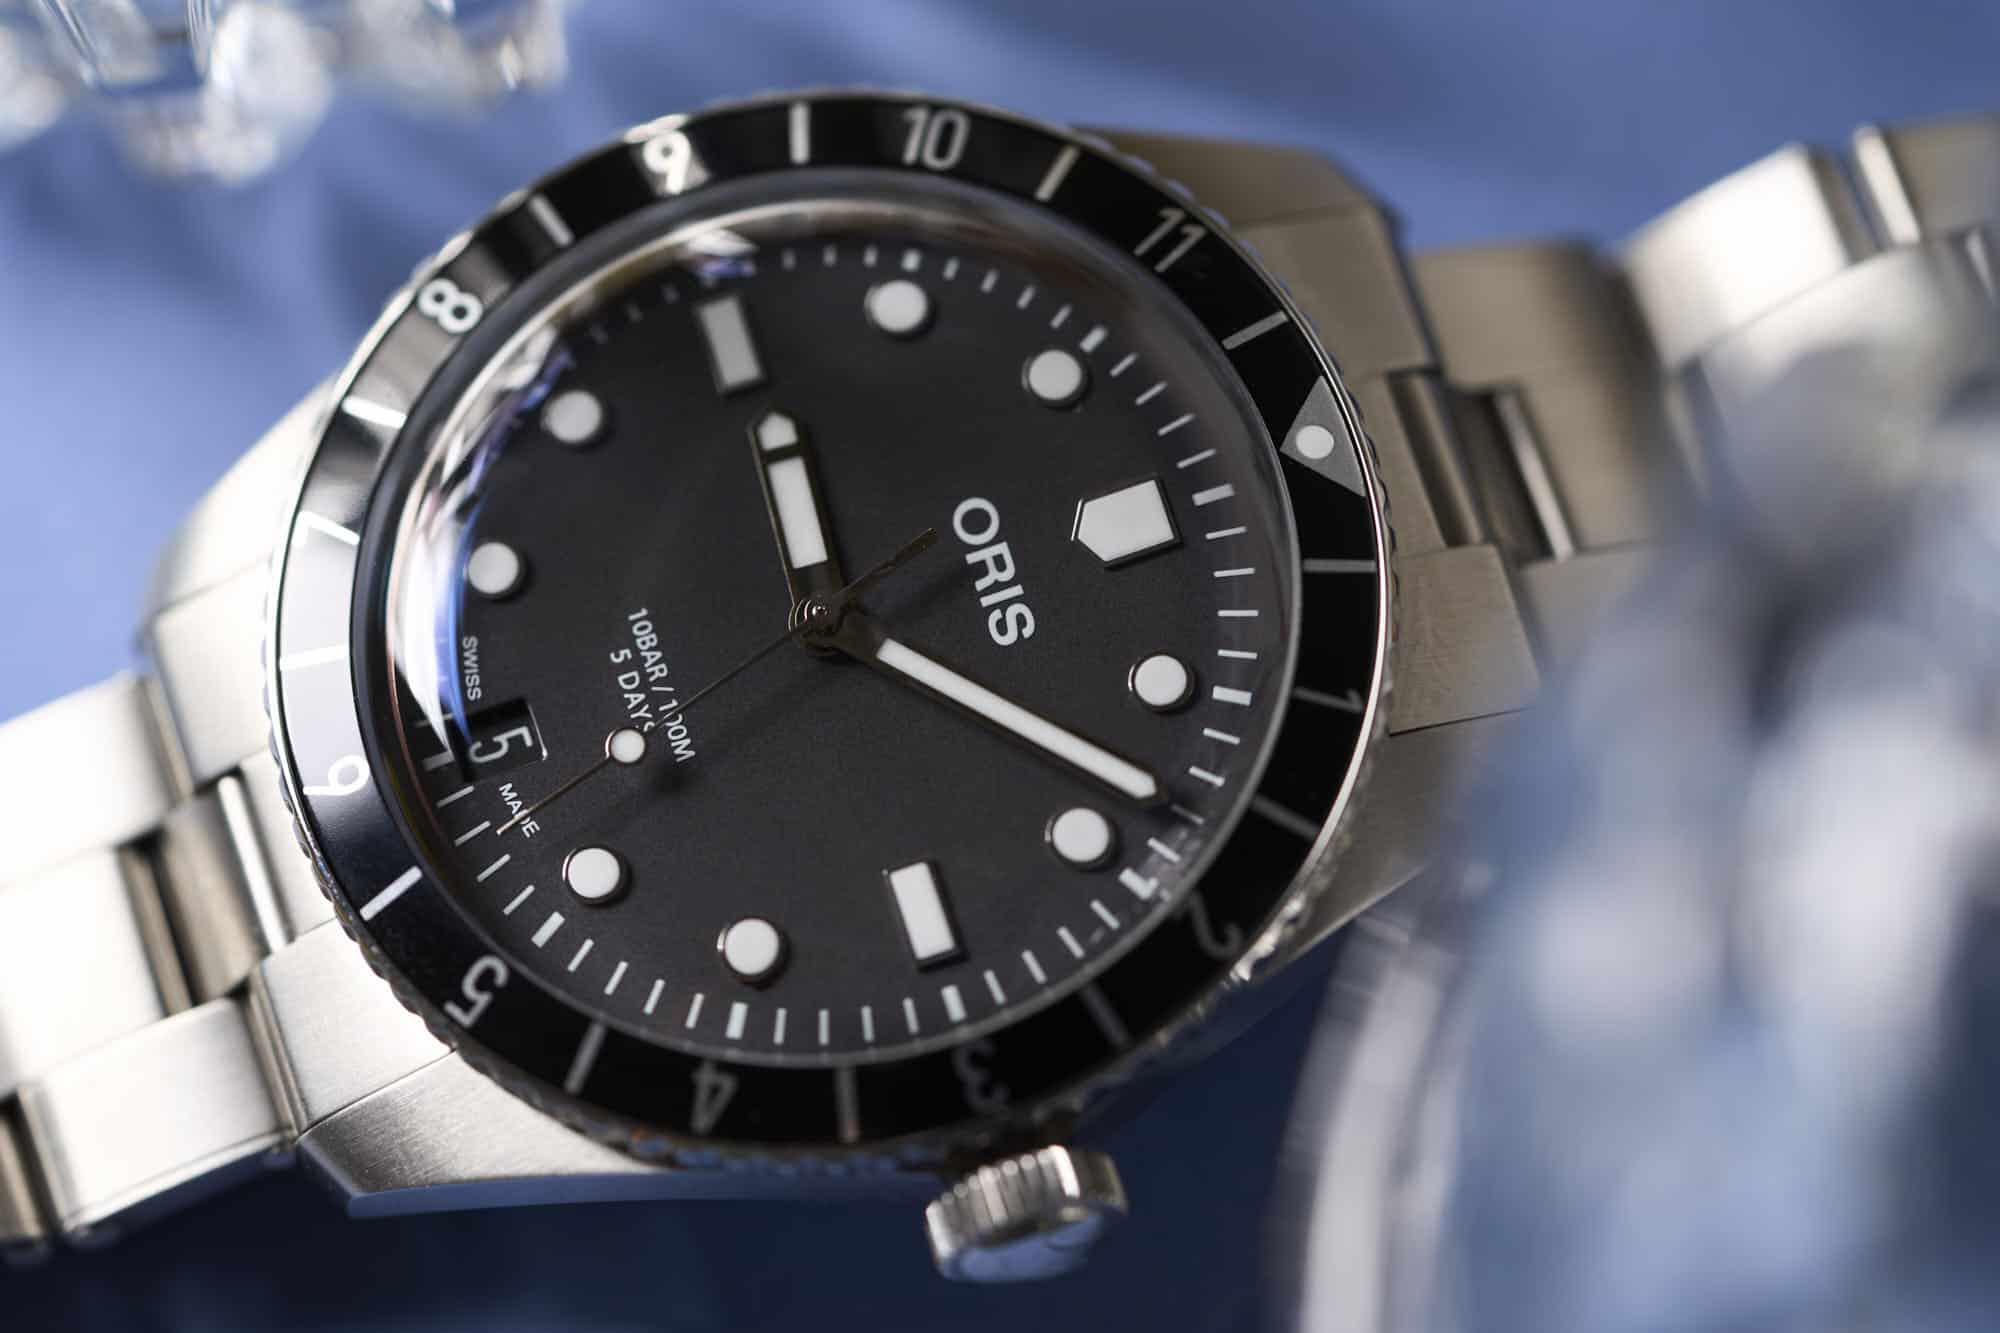 The Latest Oris Diver 65 Is Travel Ready Featuring The Caliber 400 And A 12 Hour Bezel